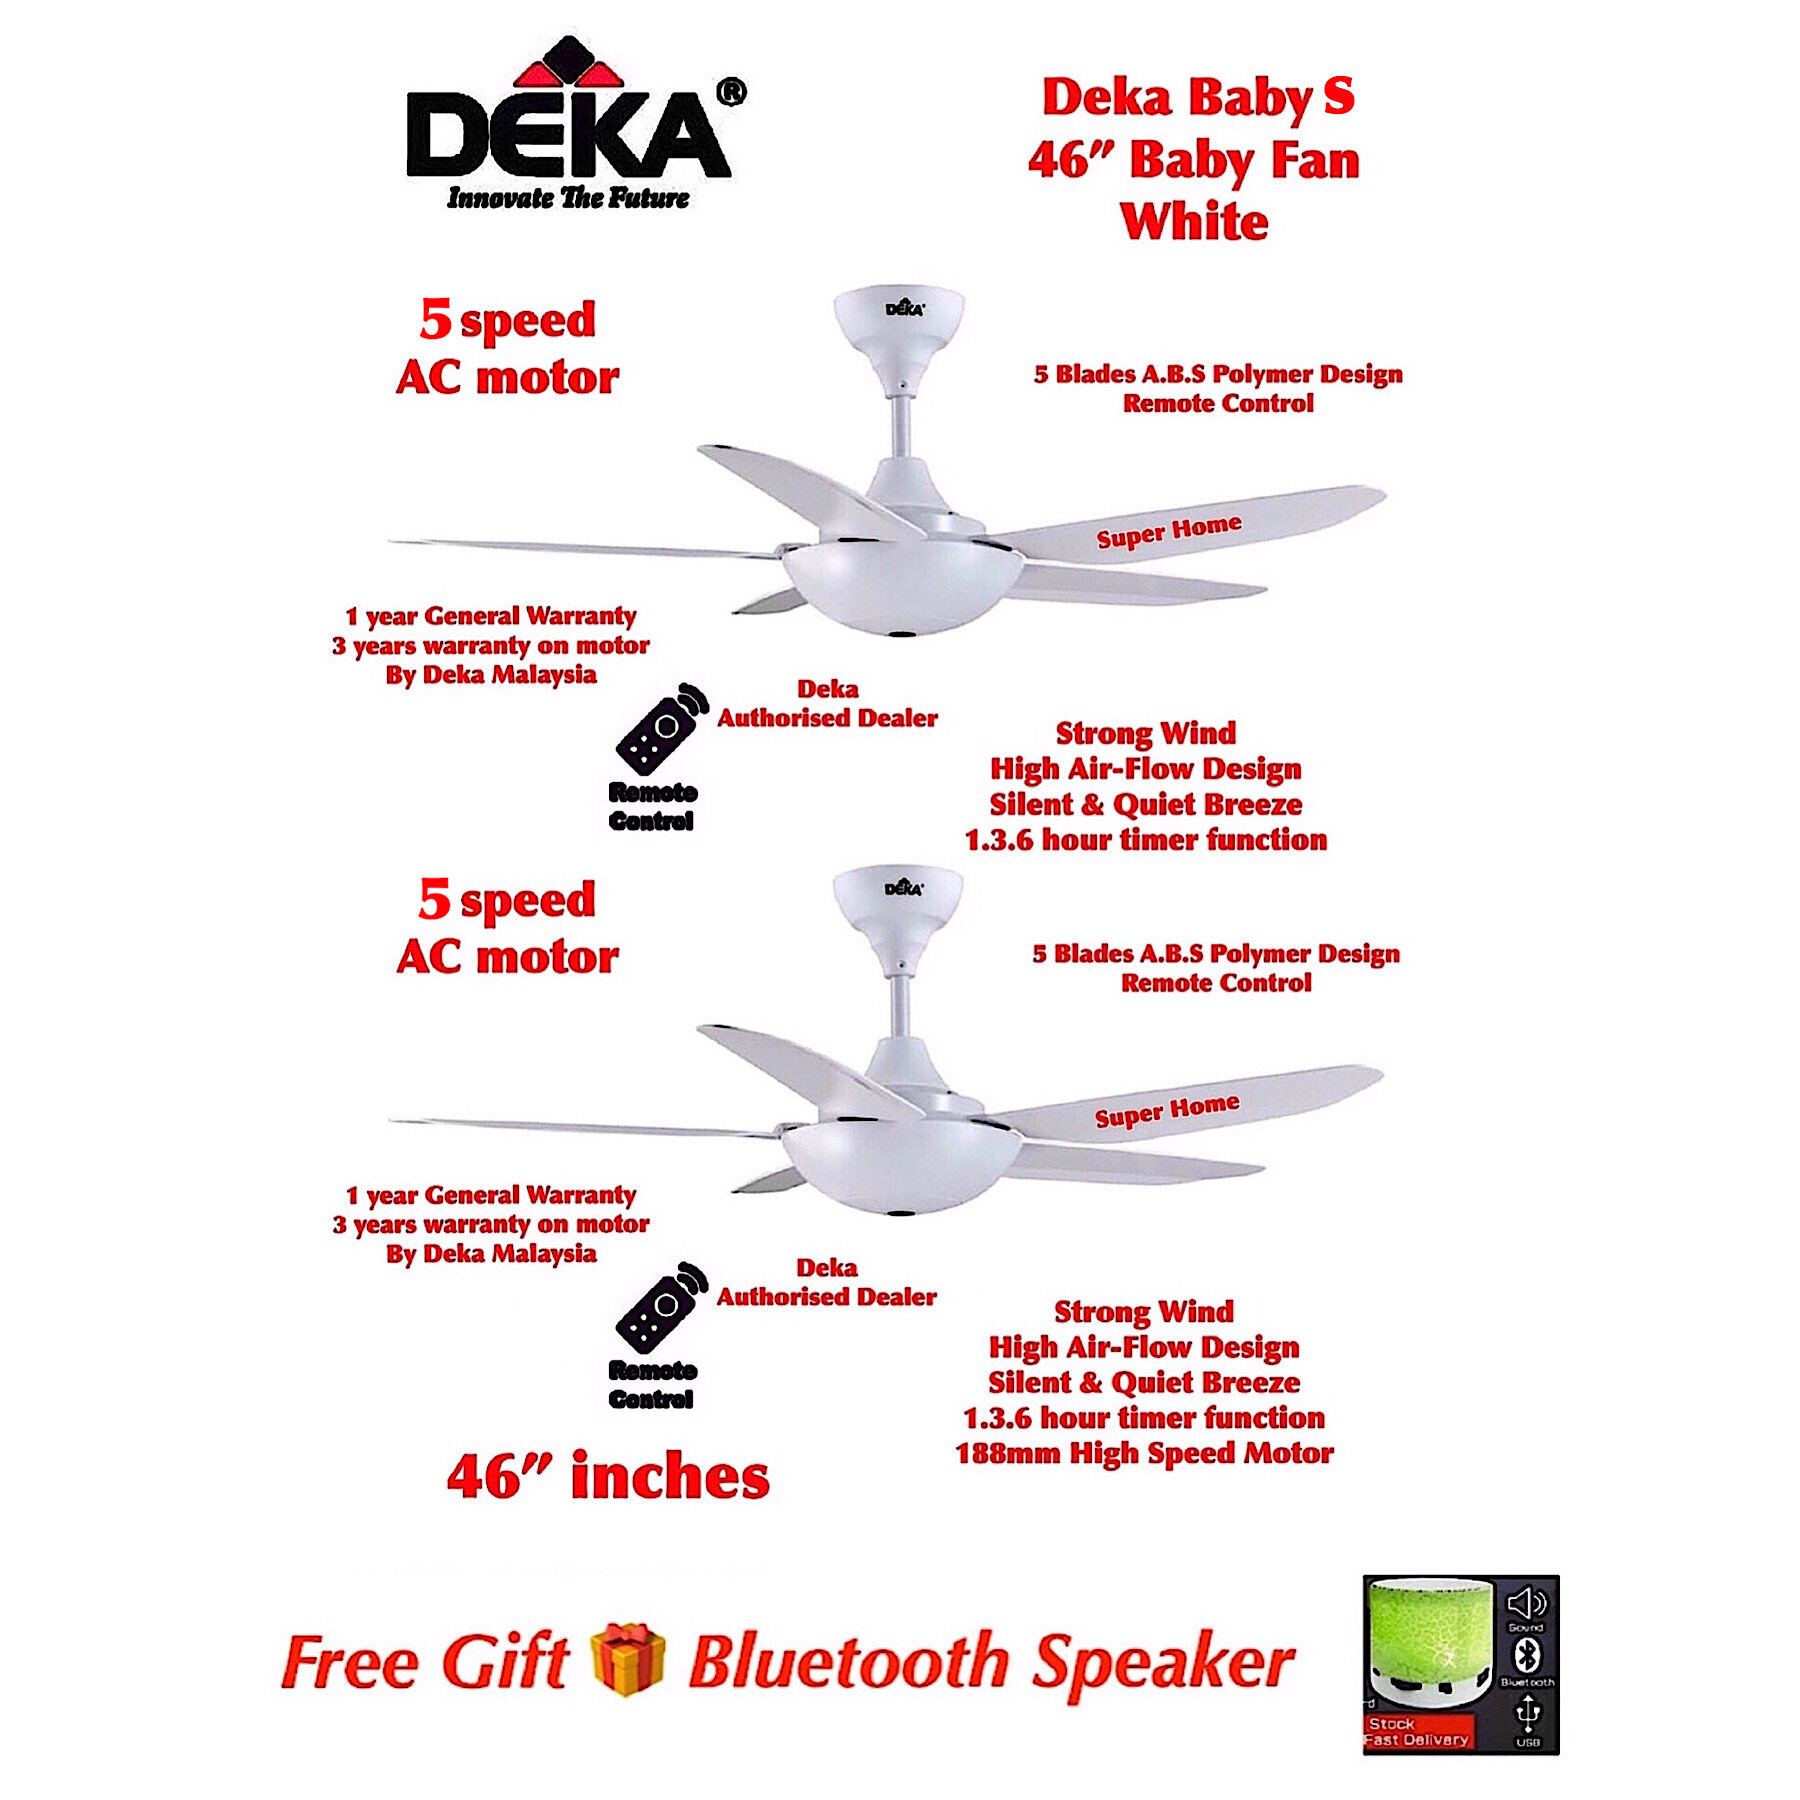 Deka Baby Fan Baby S White Remote Control 46 inches 5 Blades Baby Ceiling Fan [2 unit] + Free Gift Mini Bluetooth Speaker